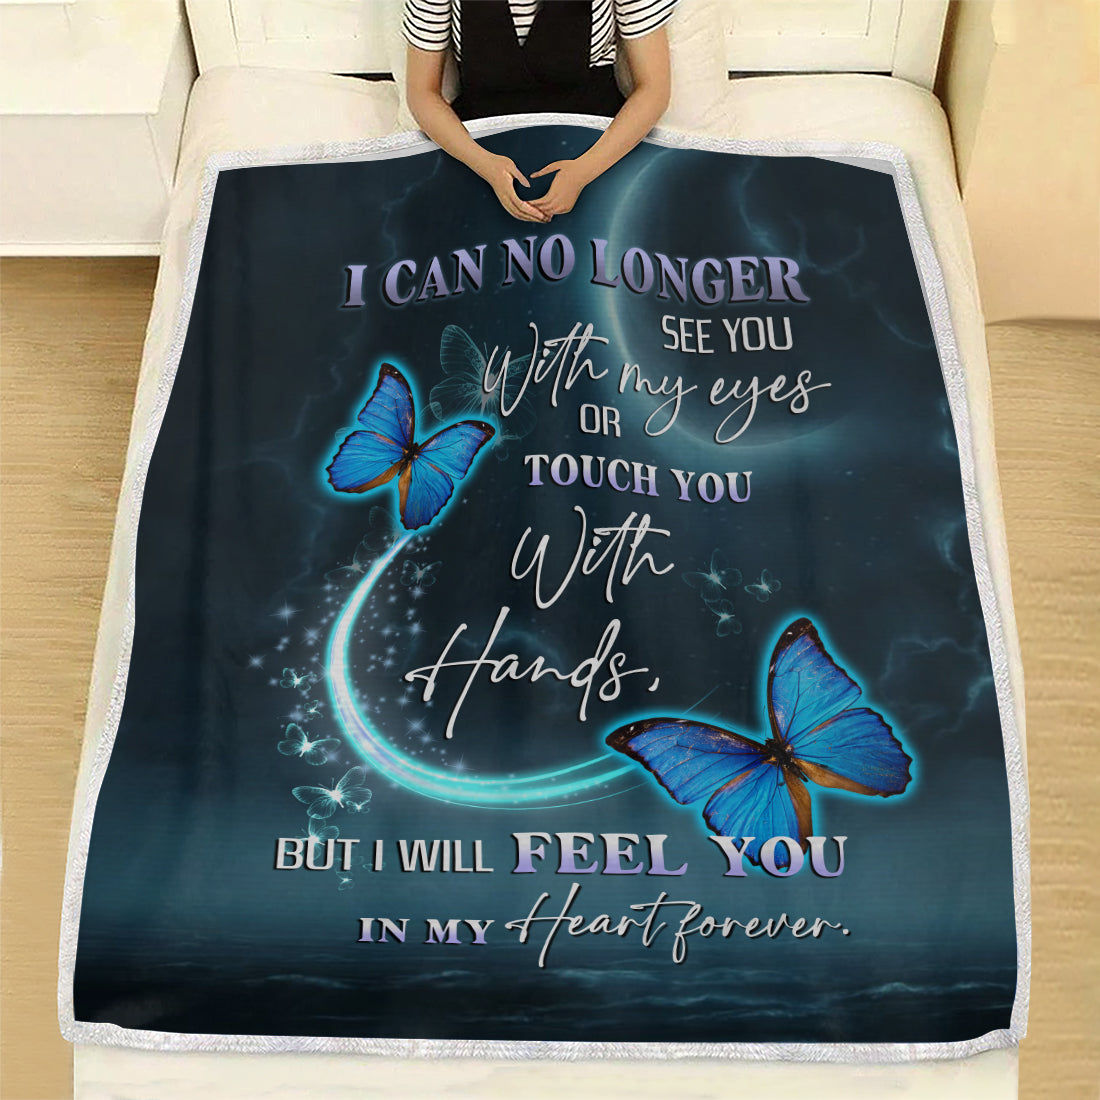 Memorial Blanket I Can No Longer See You Blanket Memorial Gifts For Loss Of Loved Ones - Sympathy Gifts- Velveteen Plush Blanket- In Loving Memory Of Dad Mom